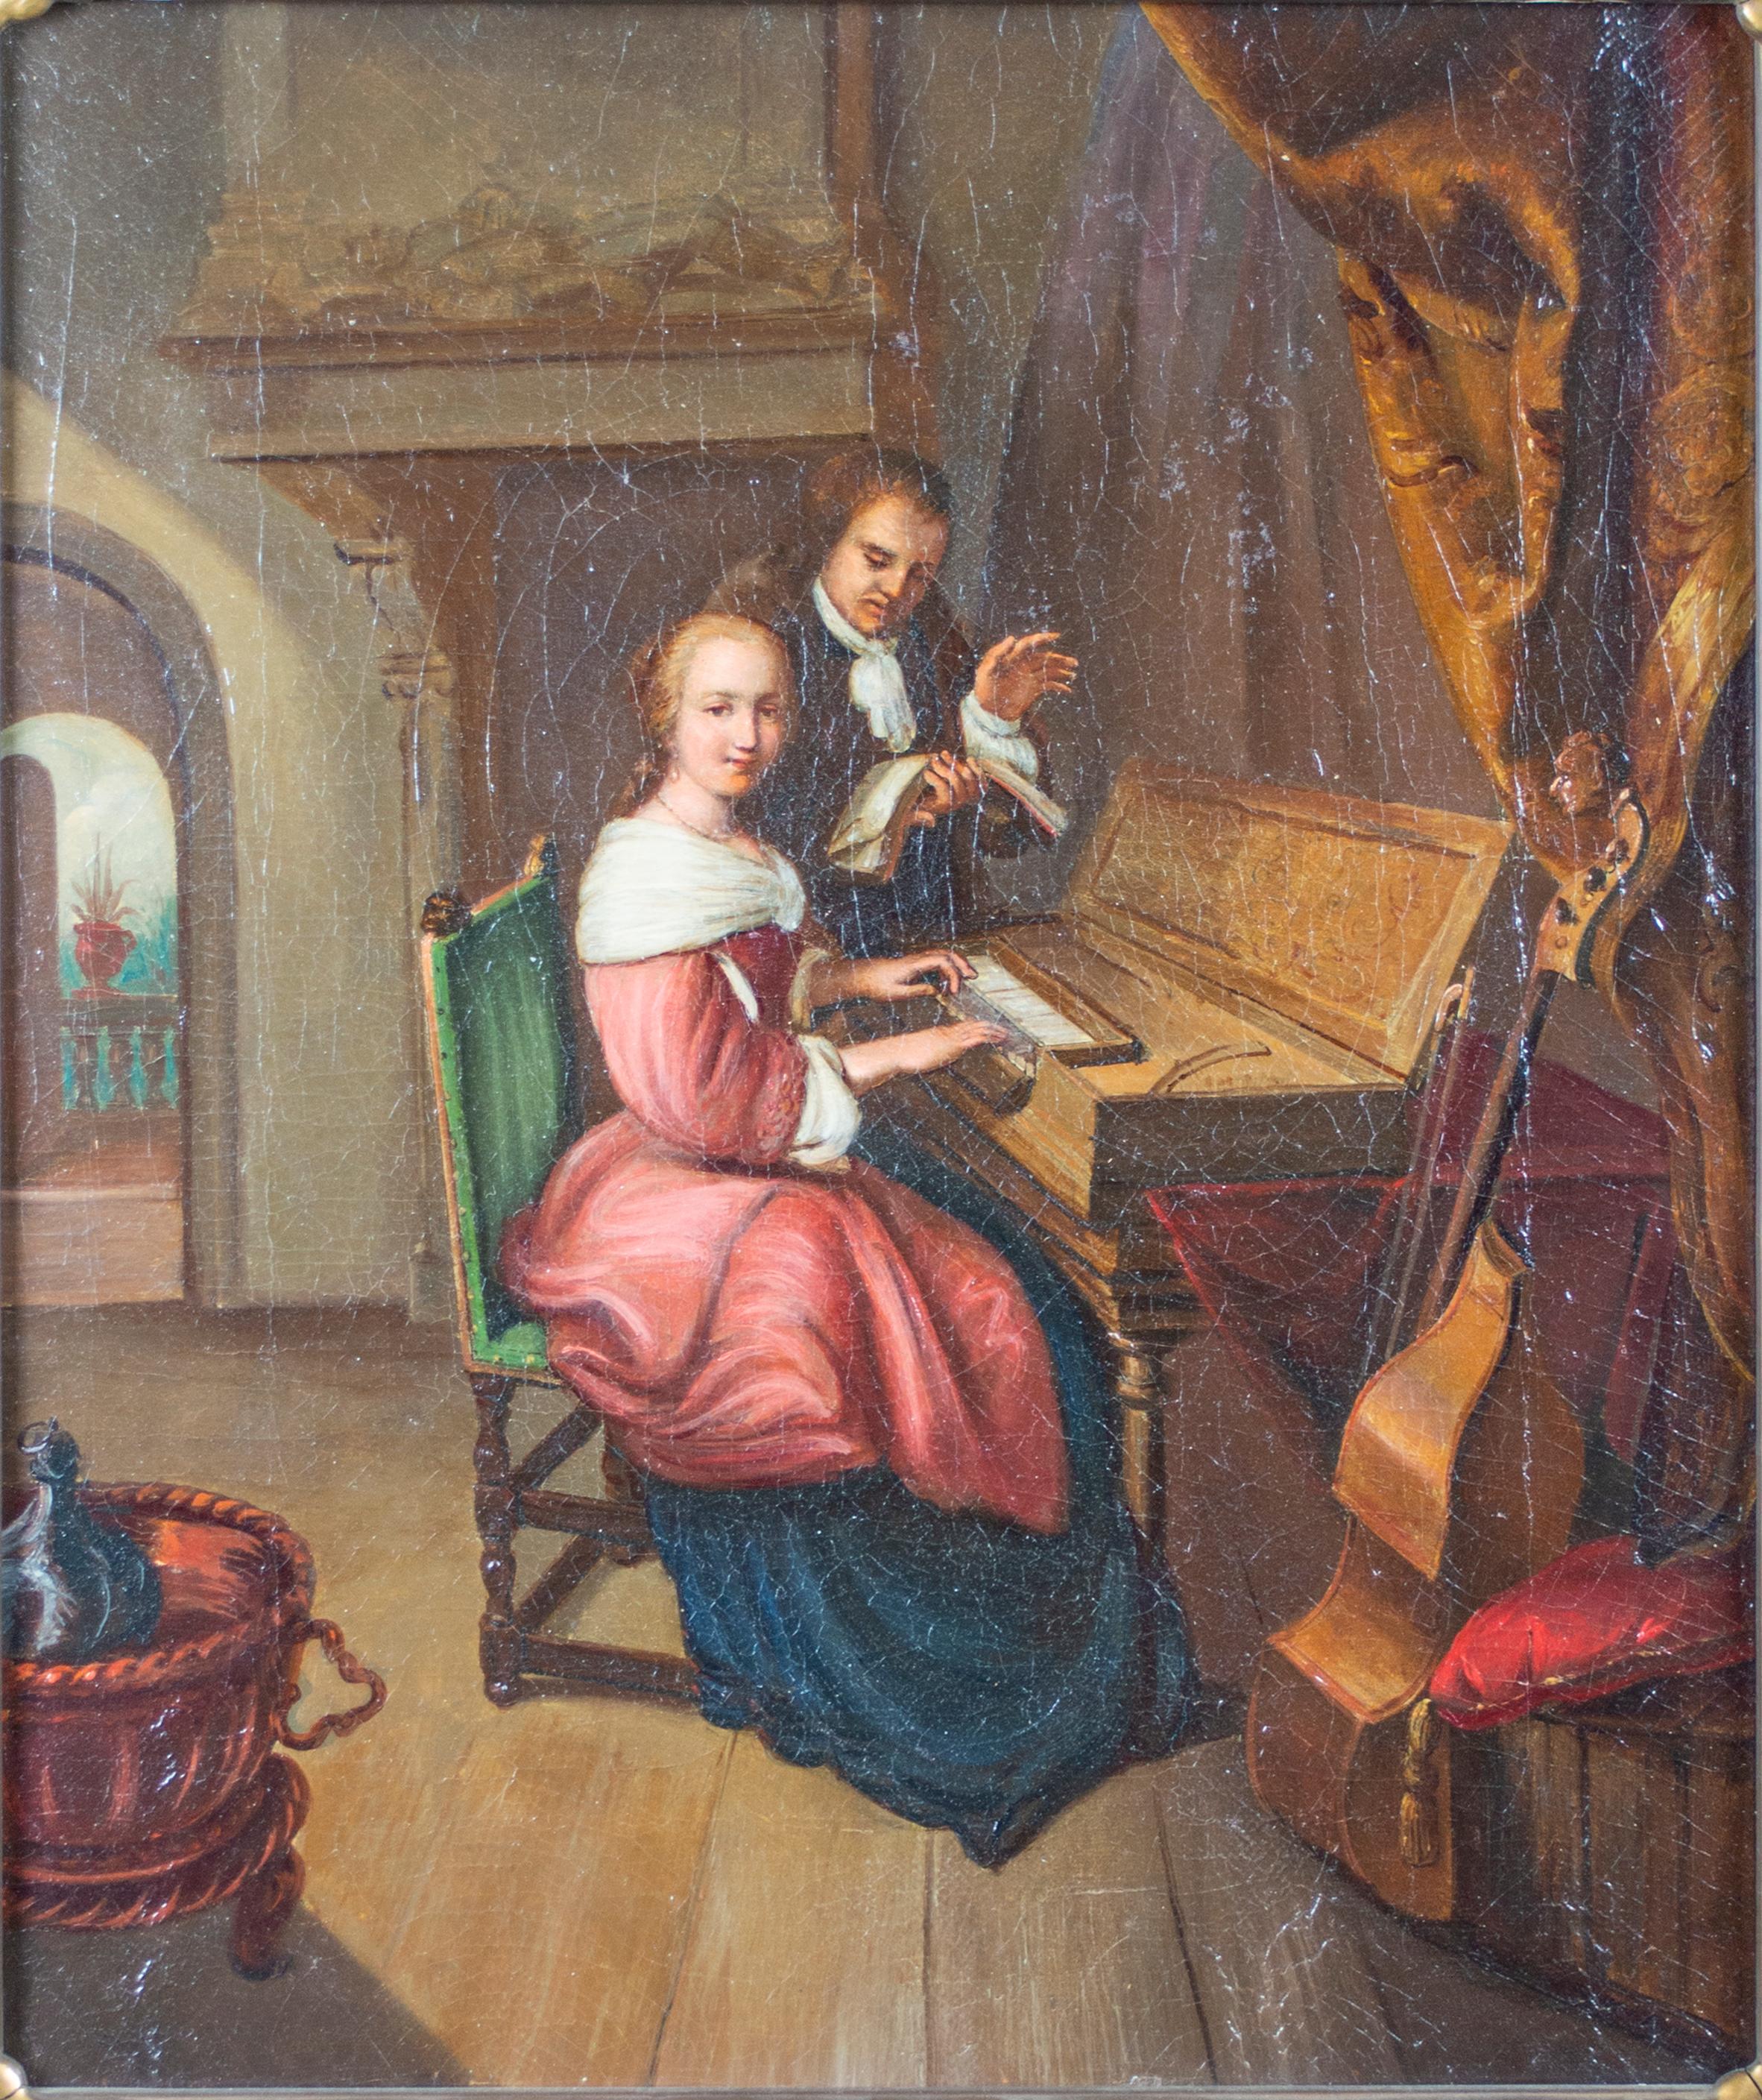 'The Music Lesson' original oil painting after Dou with clavichord and viol - Painting by Gerrit Dou (After)